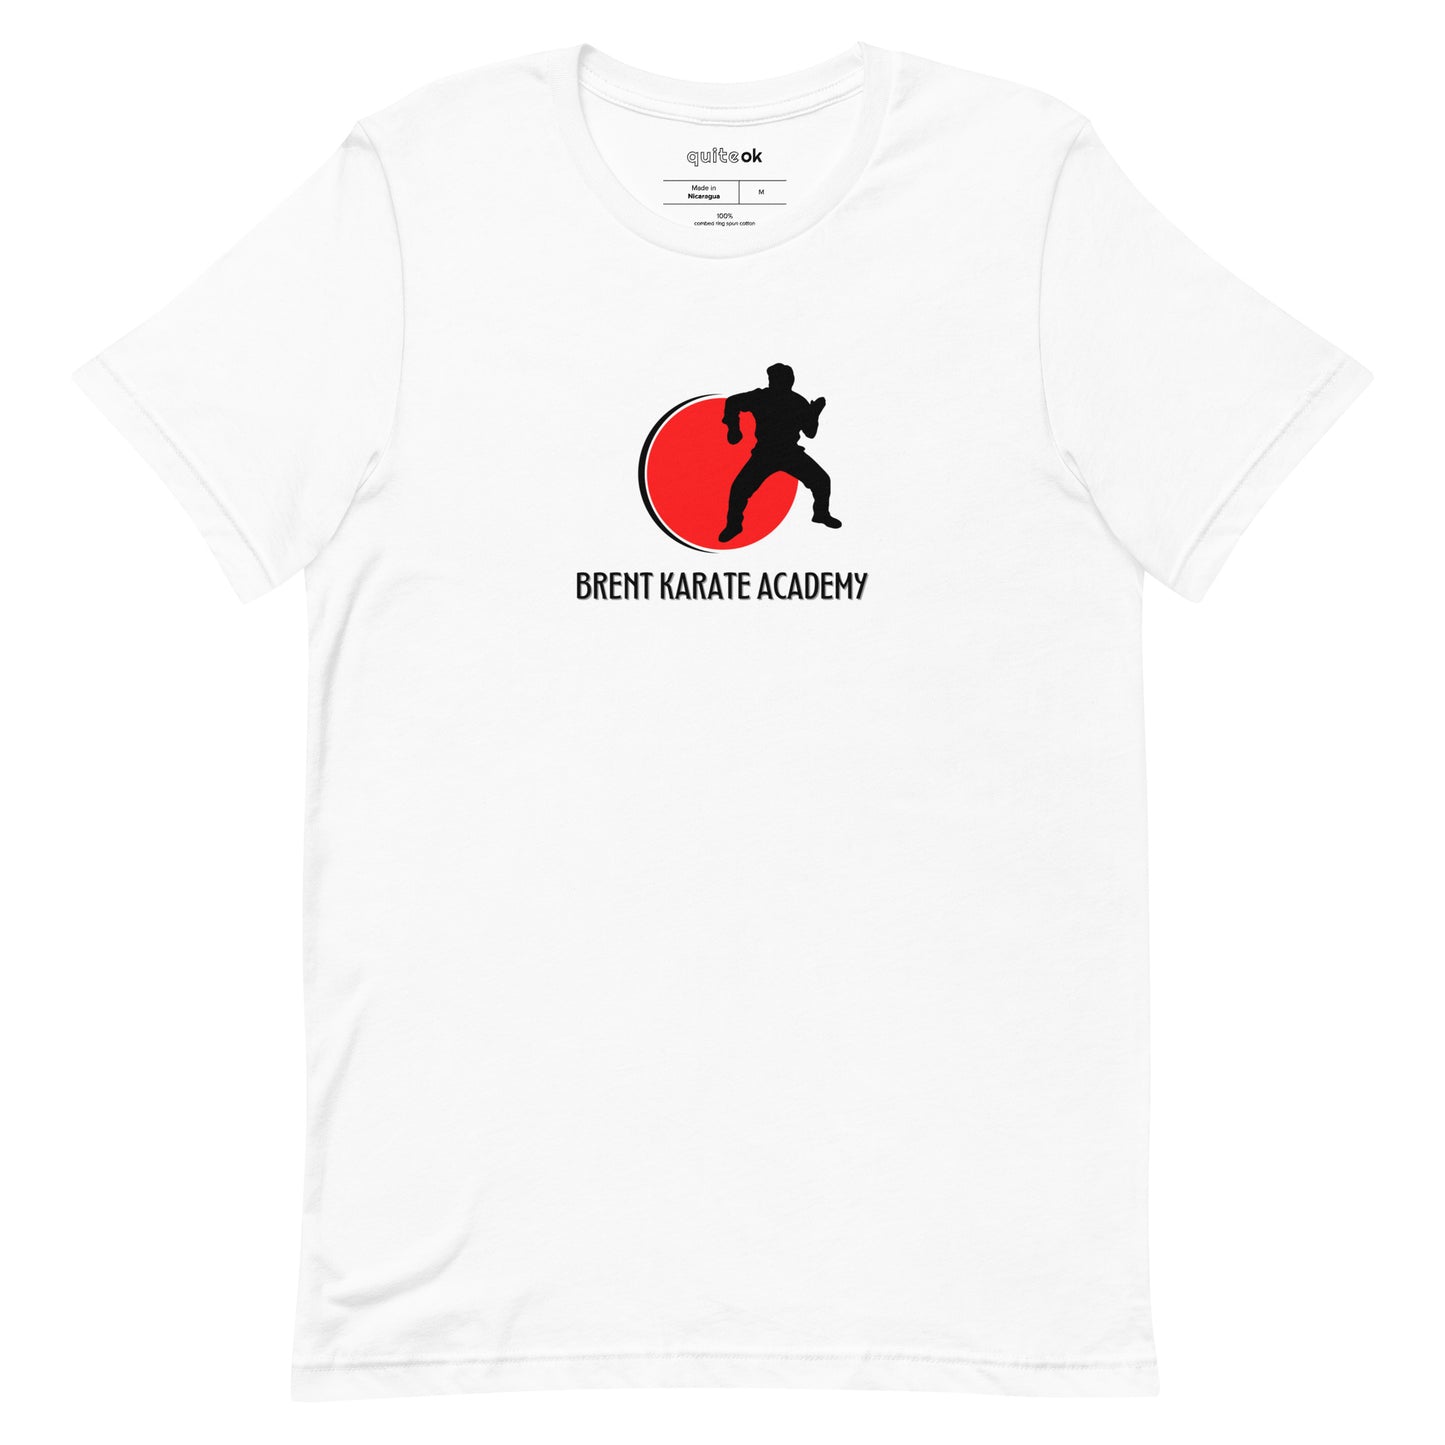 Brent Karate Academy Comedy Quote T-Shirt